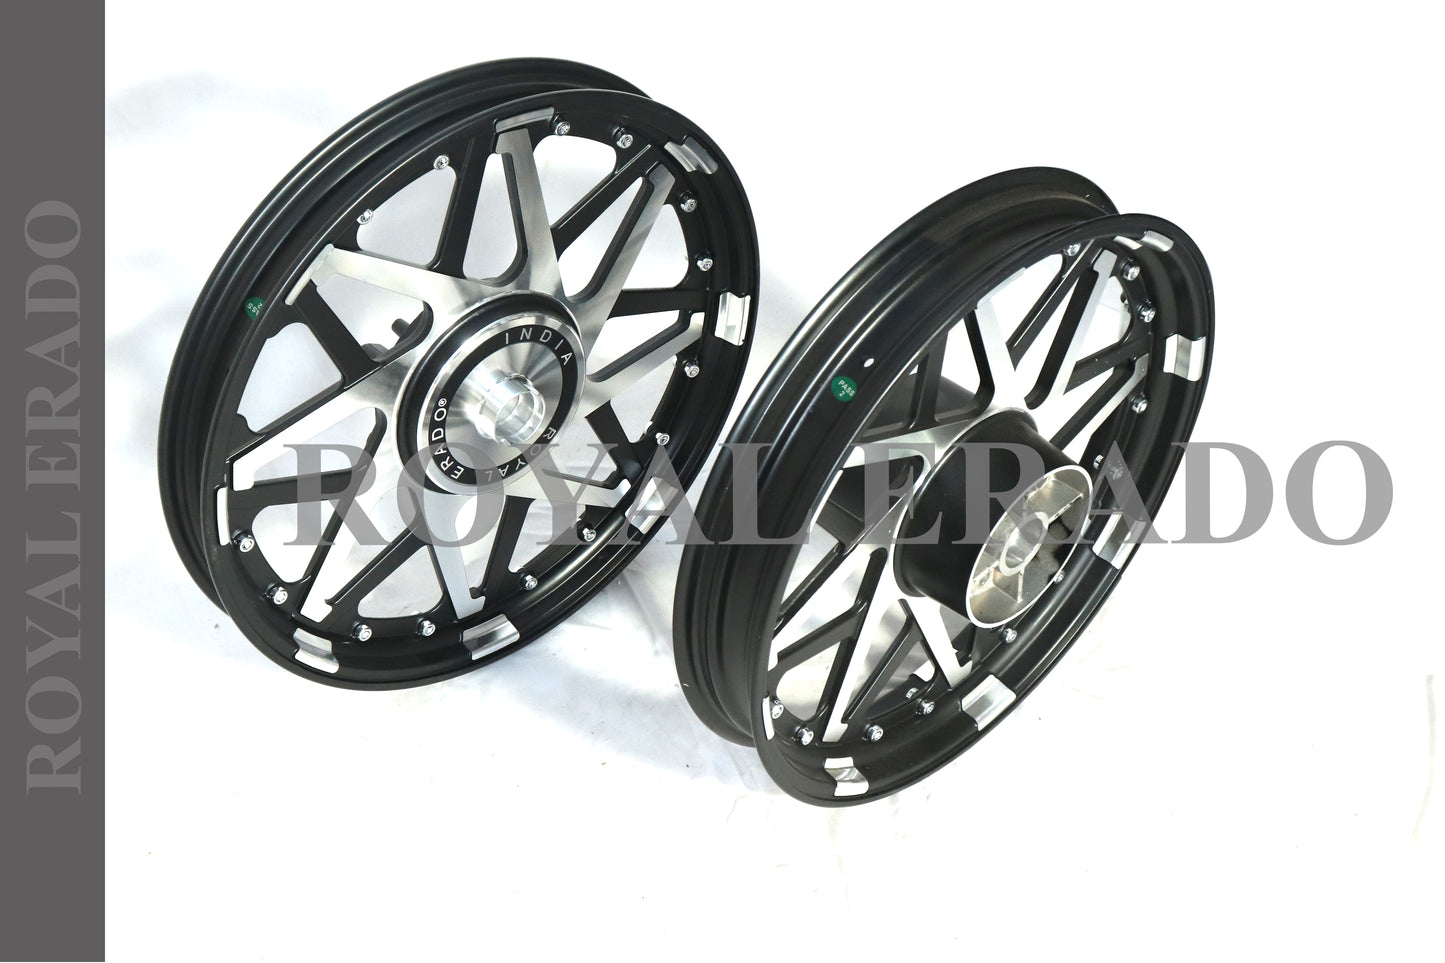 DOUBLE V DESIGN alloy wheel for thunderbird and classic double disc